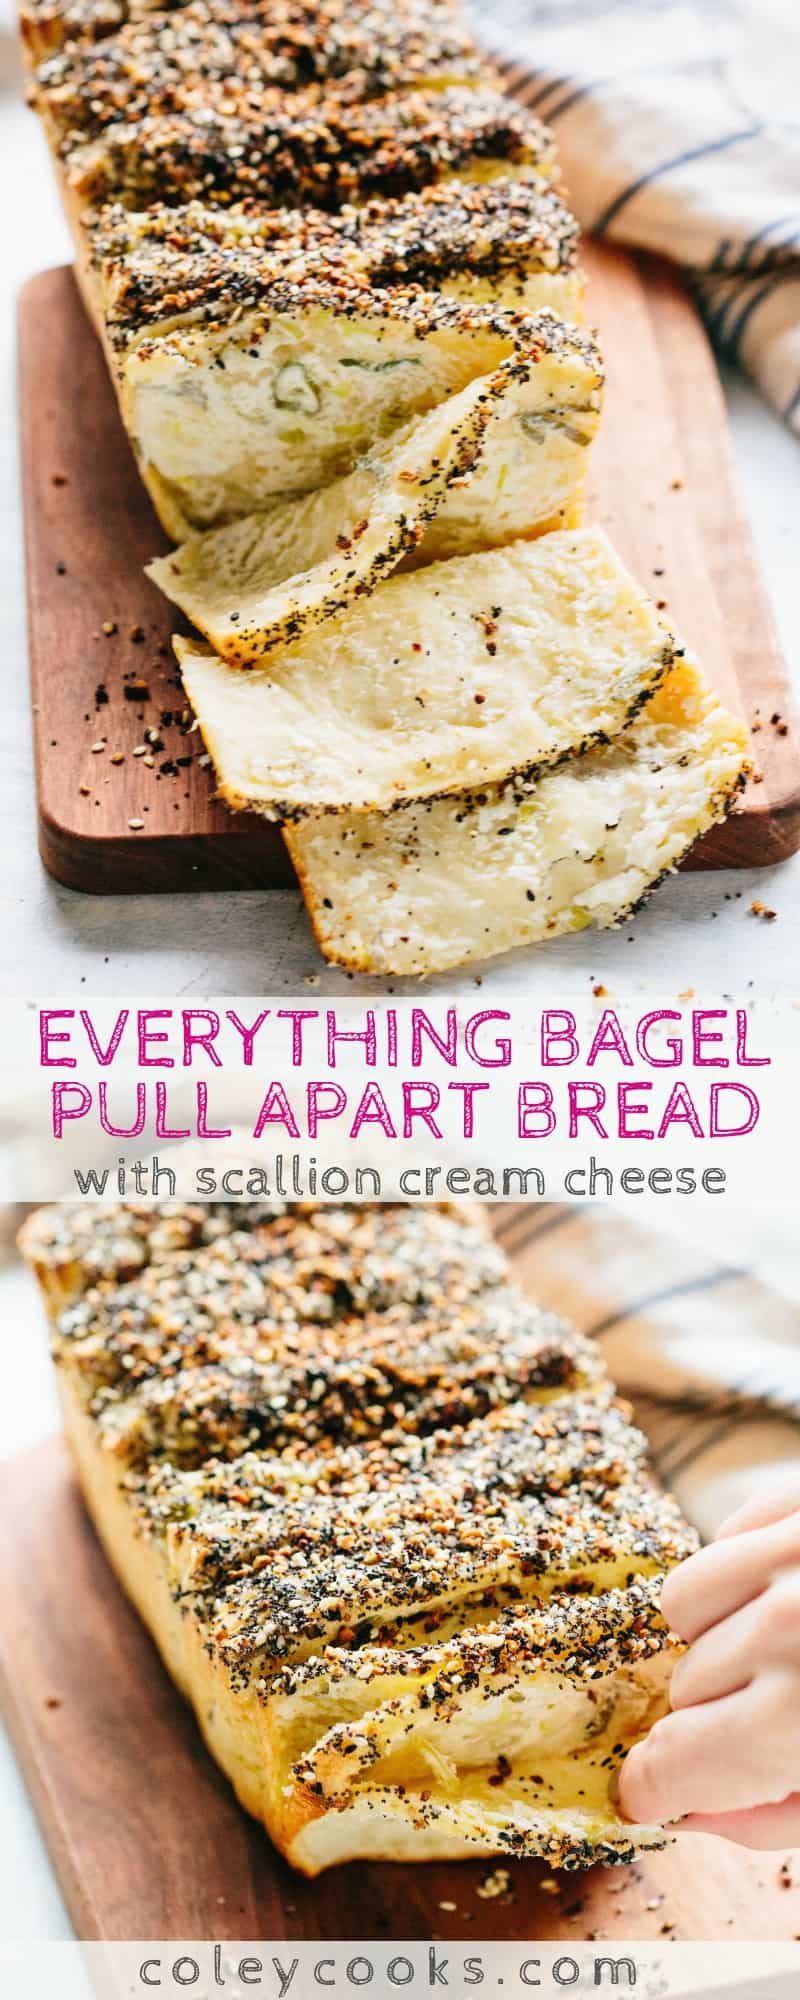 EVERYTHING BAGEL PULL APART BREAD with Scallion Cream Cheese | This is the BEST pull apart bread! If you love everything bagels, you will love this pull apart bread. | #pullapart #bread #recipe #everything #bagel #scallion #creamcheese | ColeyCooks.com